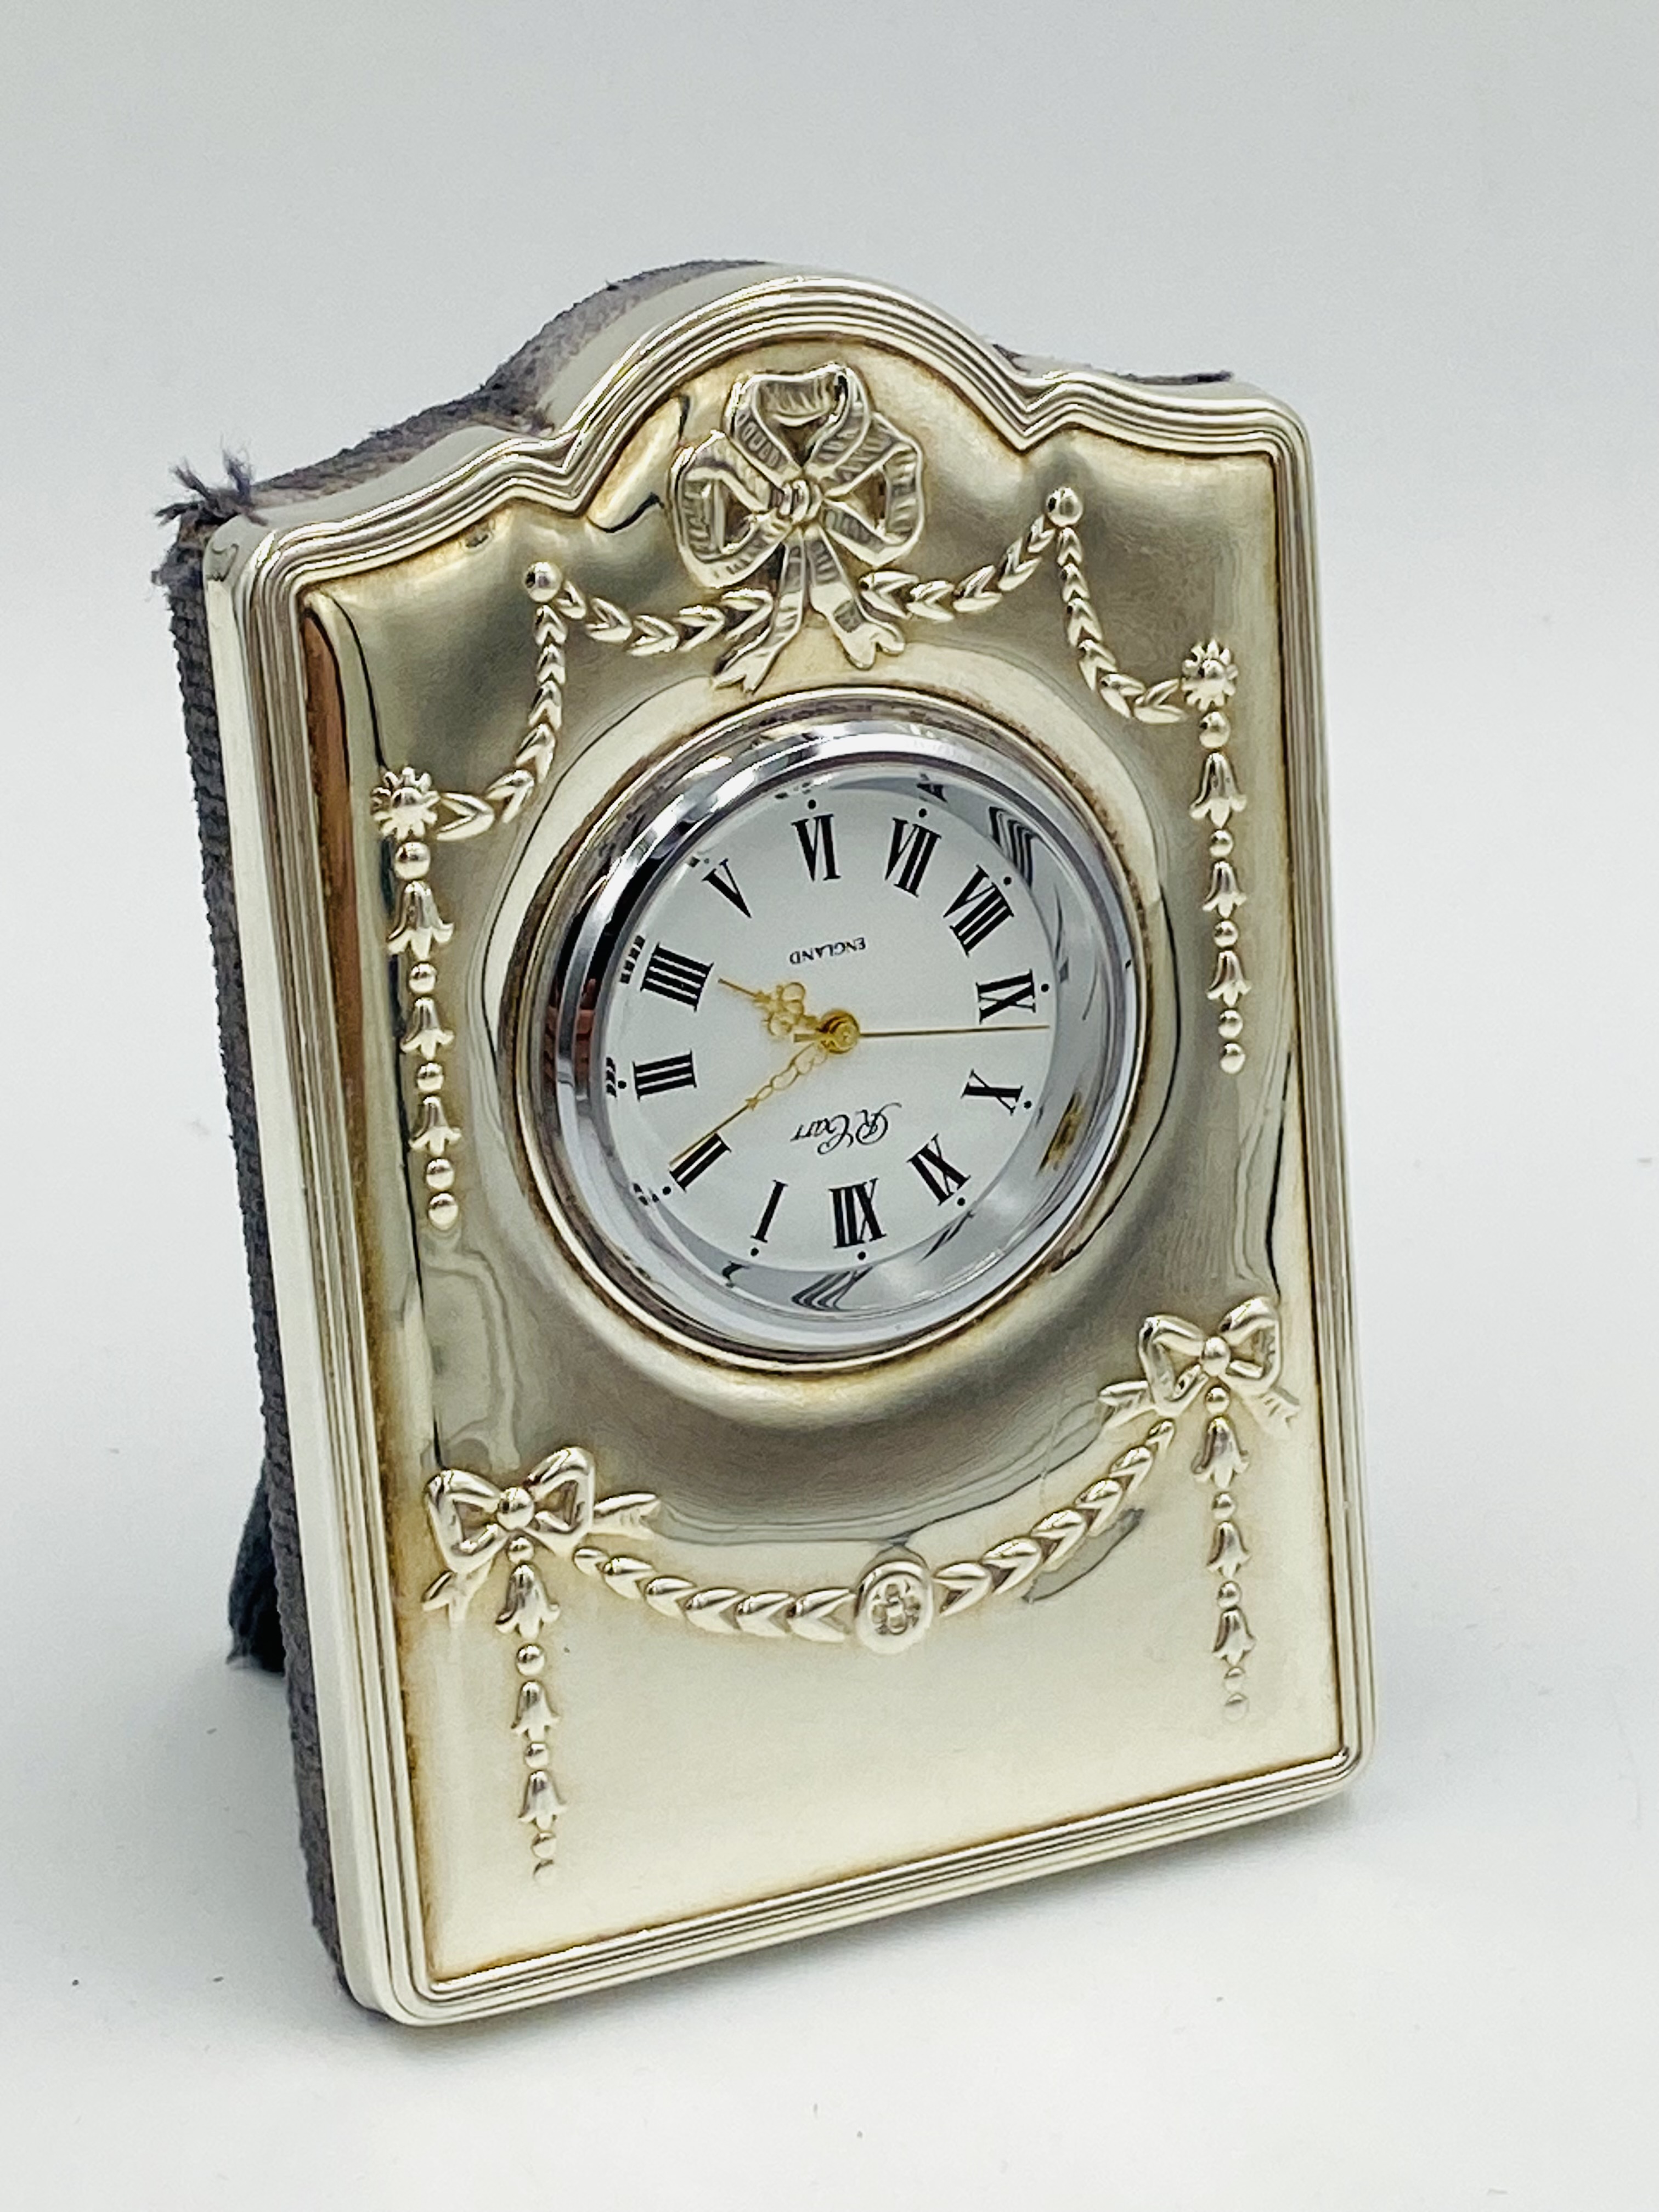 Two silver cups and a silver framed clock - Image 4 of 6